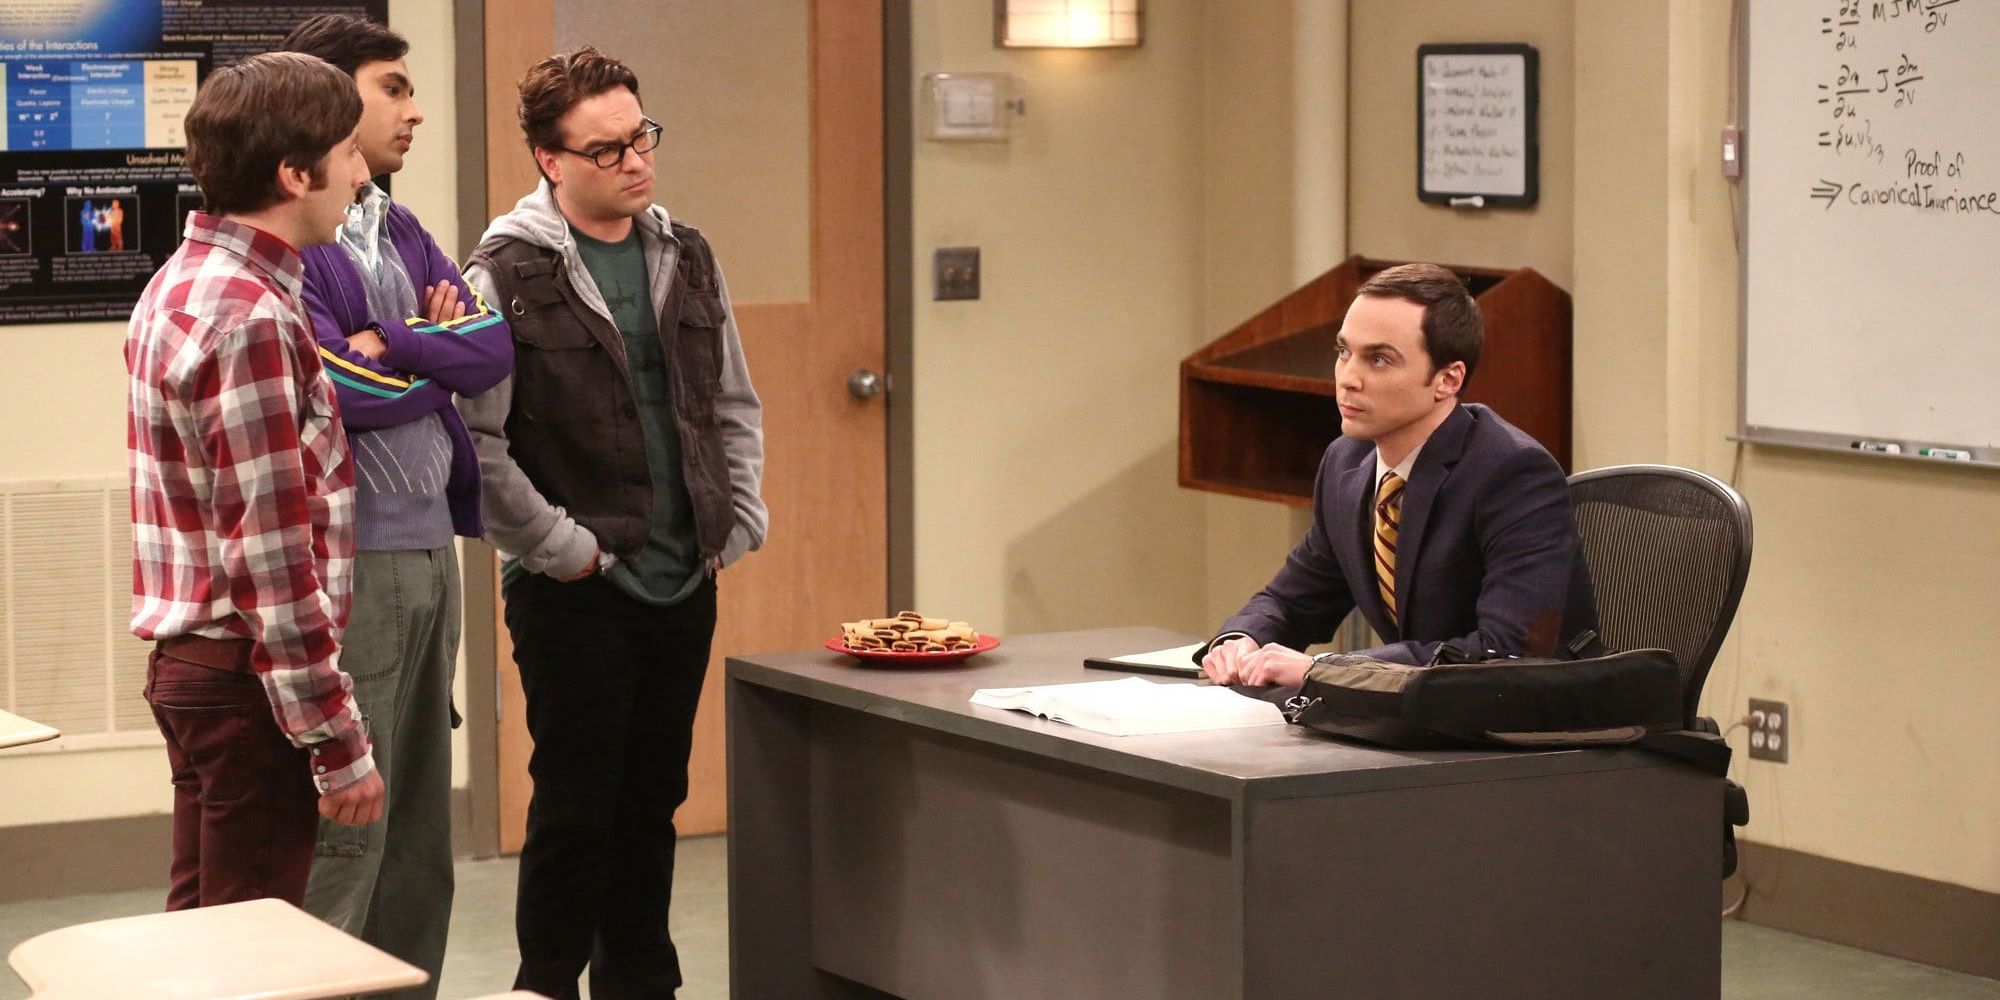 Why Are 23.4 Million People Watching The Big Bang Theory?